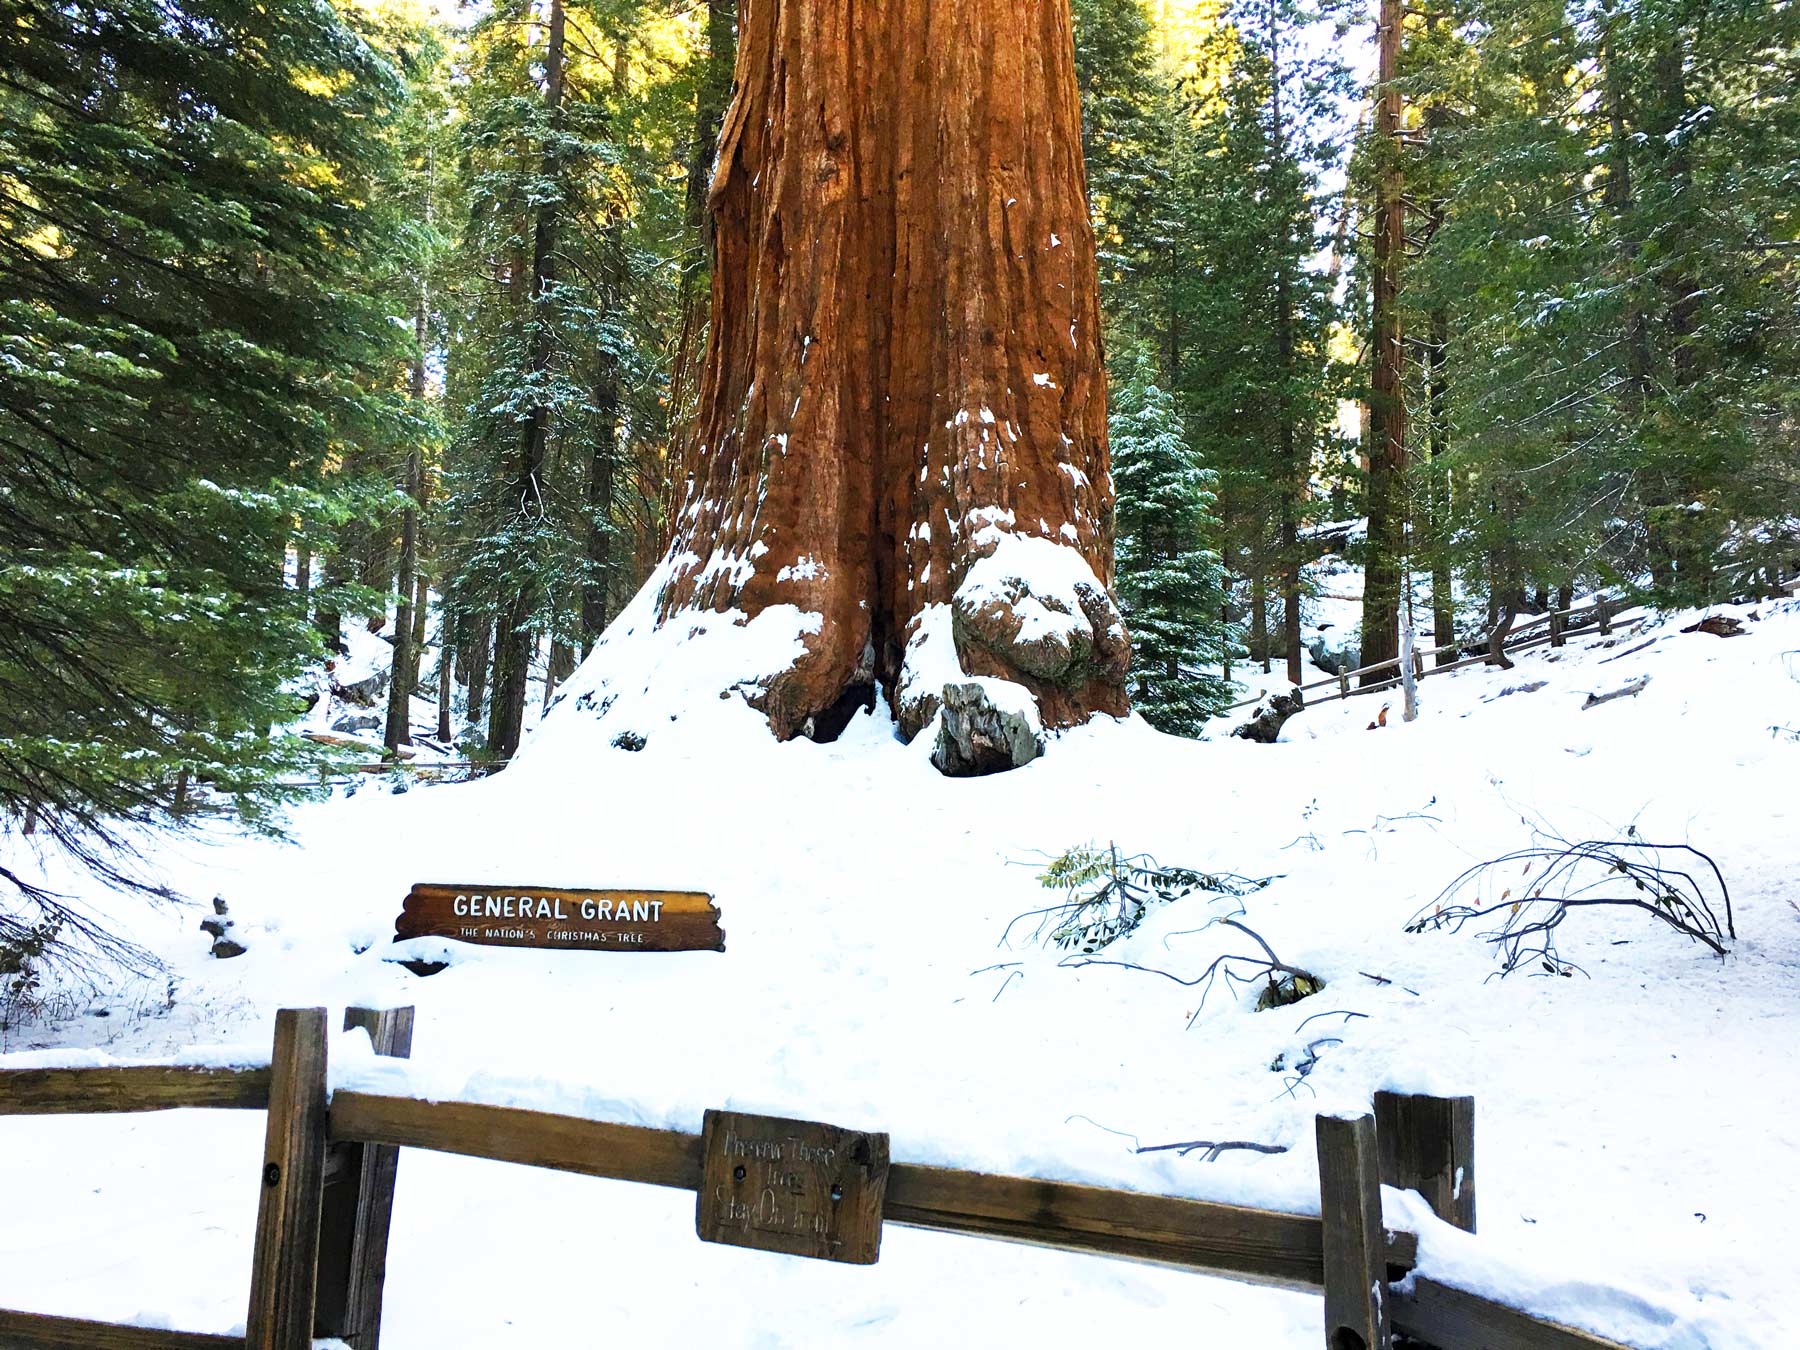 General Grant Tree: Everything You Need To Know About The World’s 2nd Largest Tree